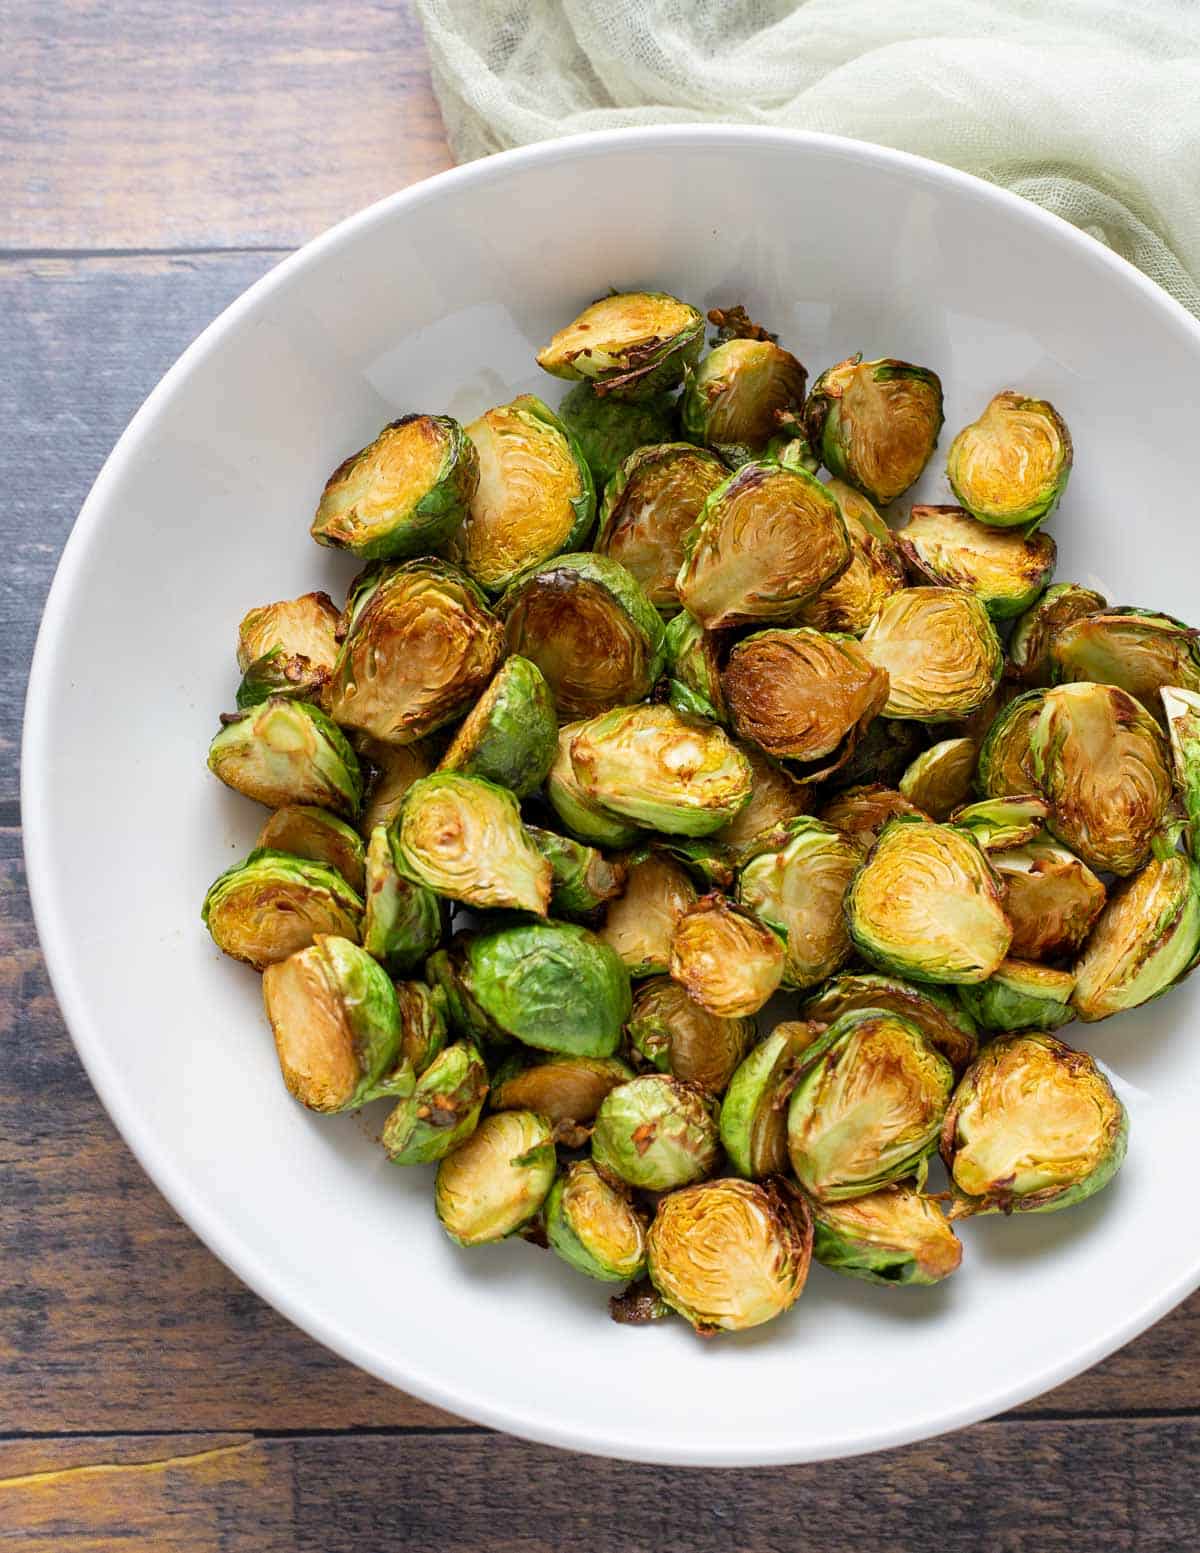 Roasted soy glazed brussels sprouts in white bowl.